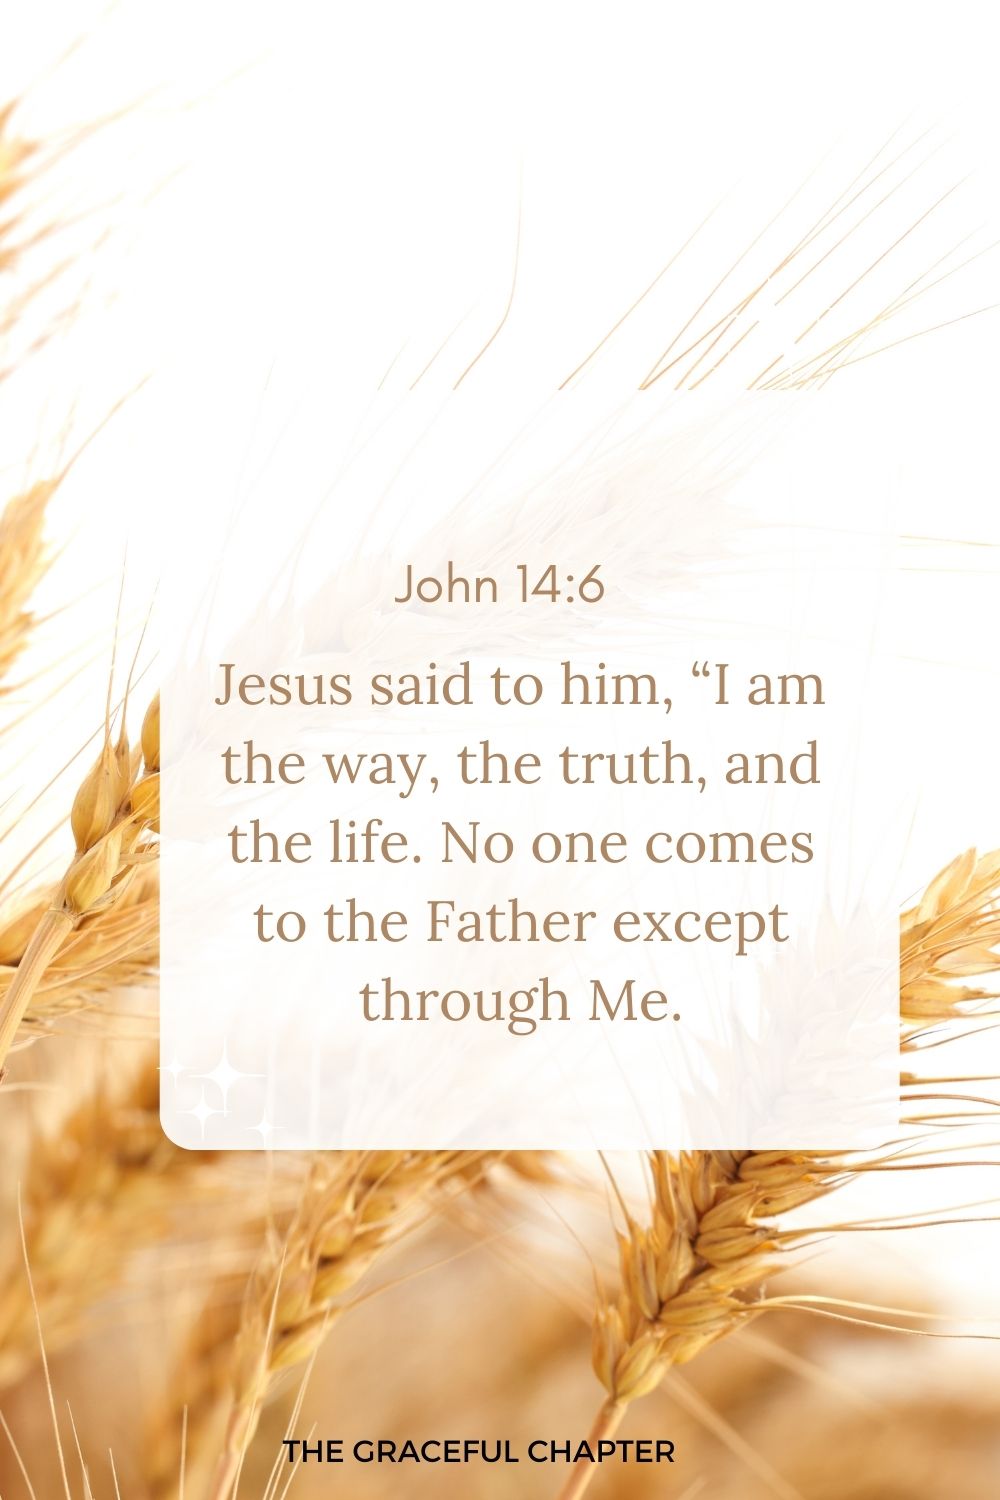 Jesus said to him, “I am the way, the truth, and the life. No one comes to the Father except through Me. John 14:6